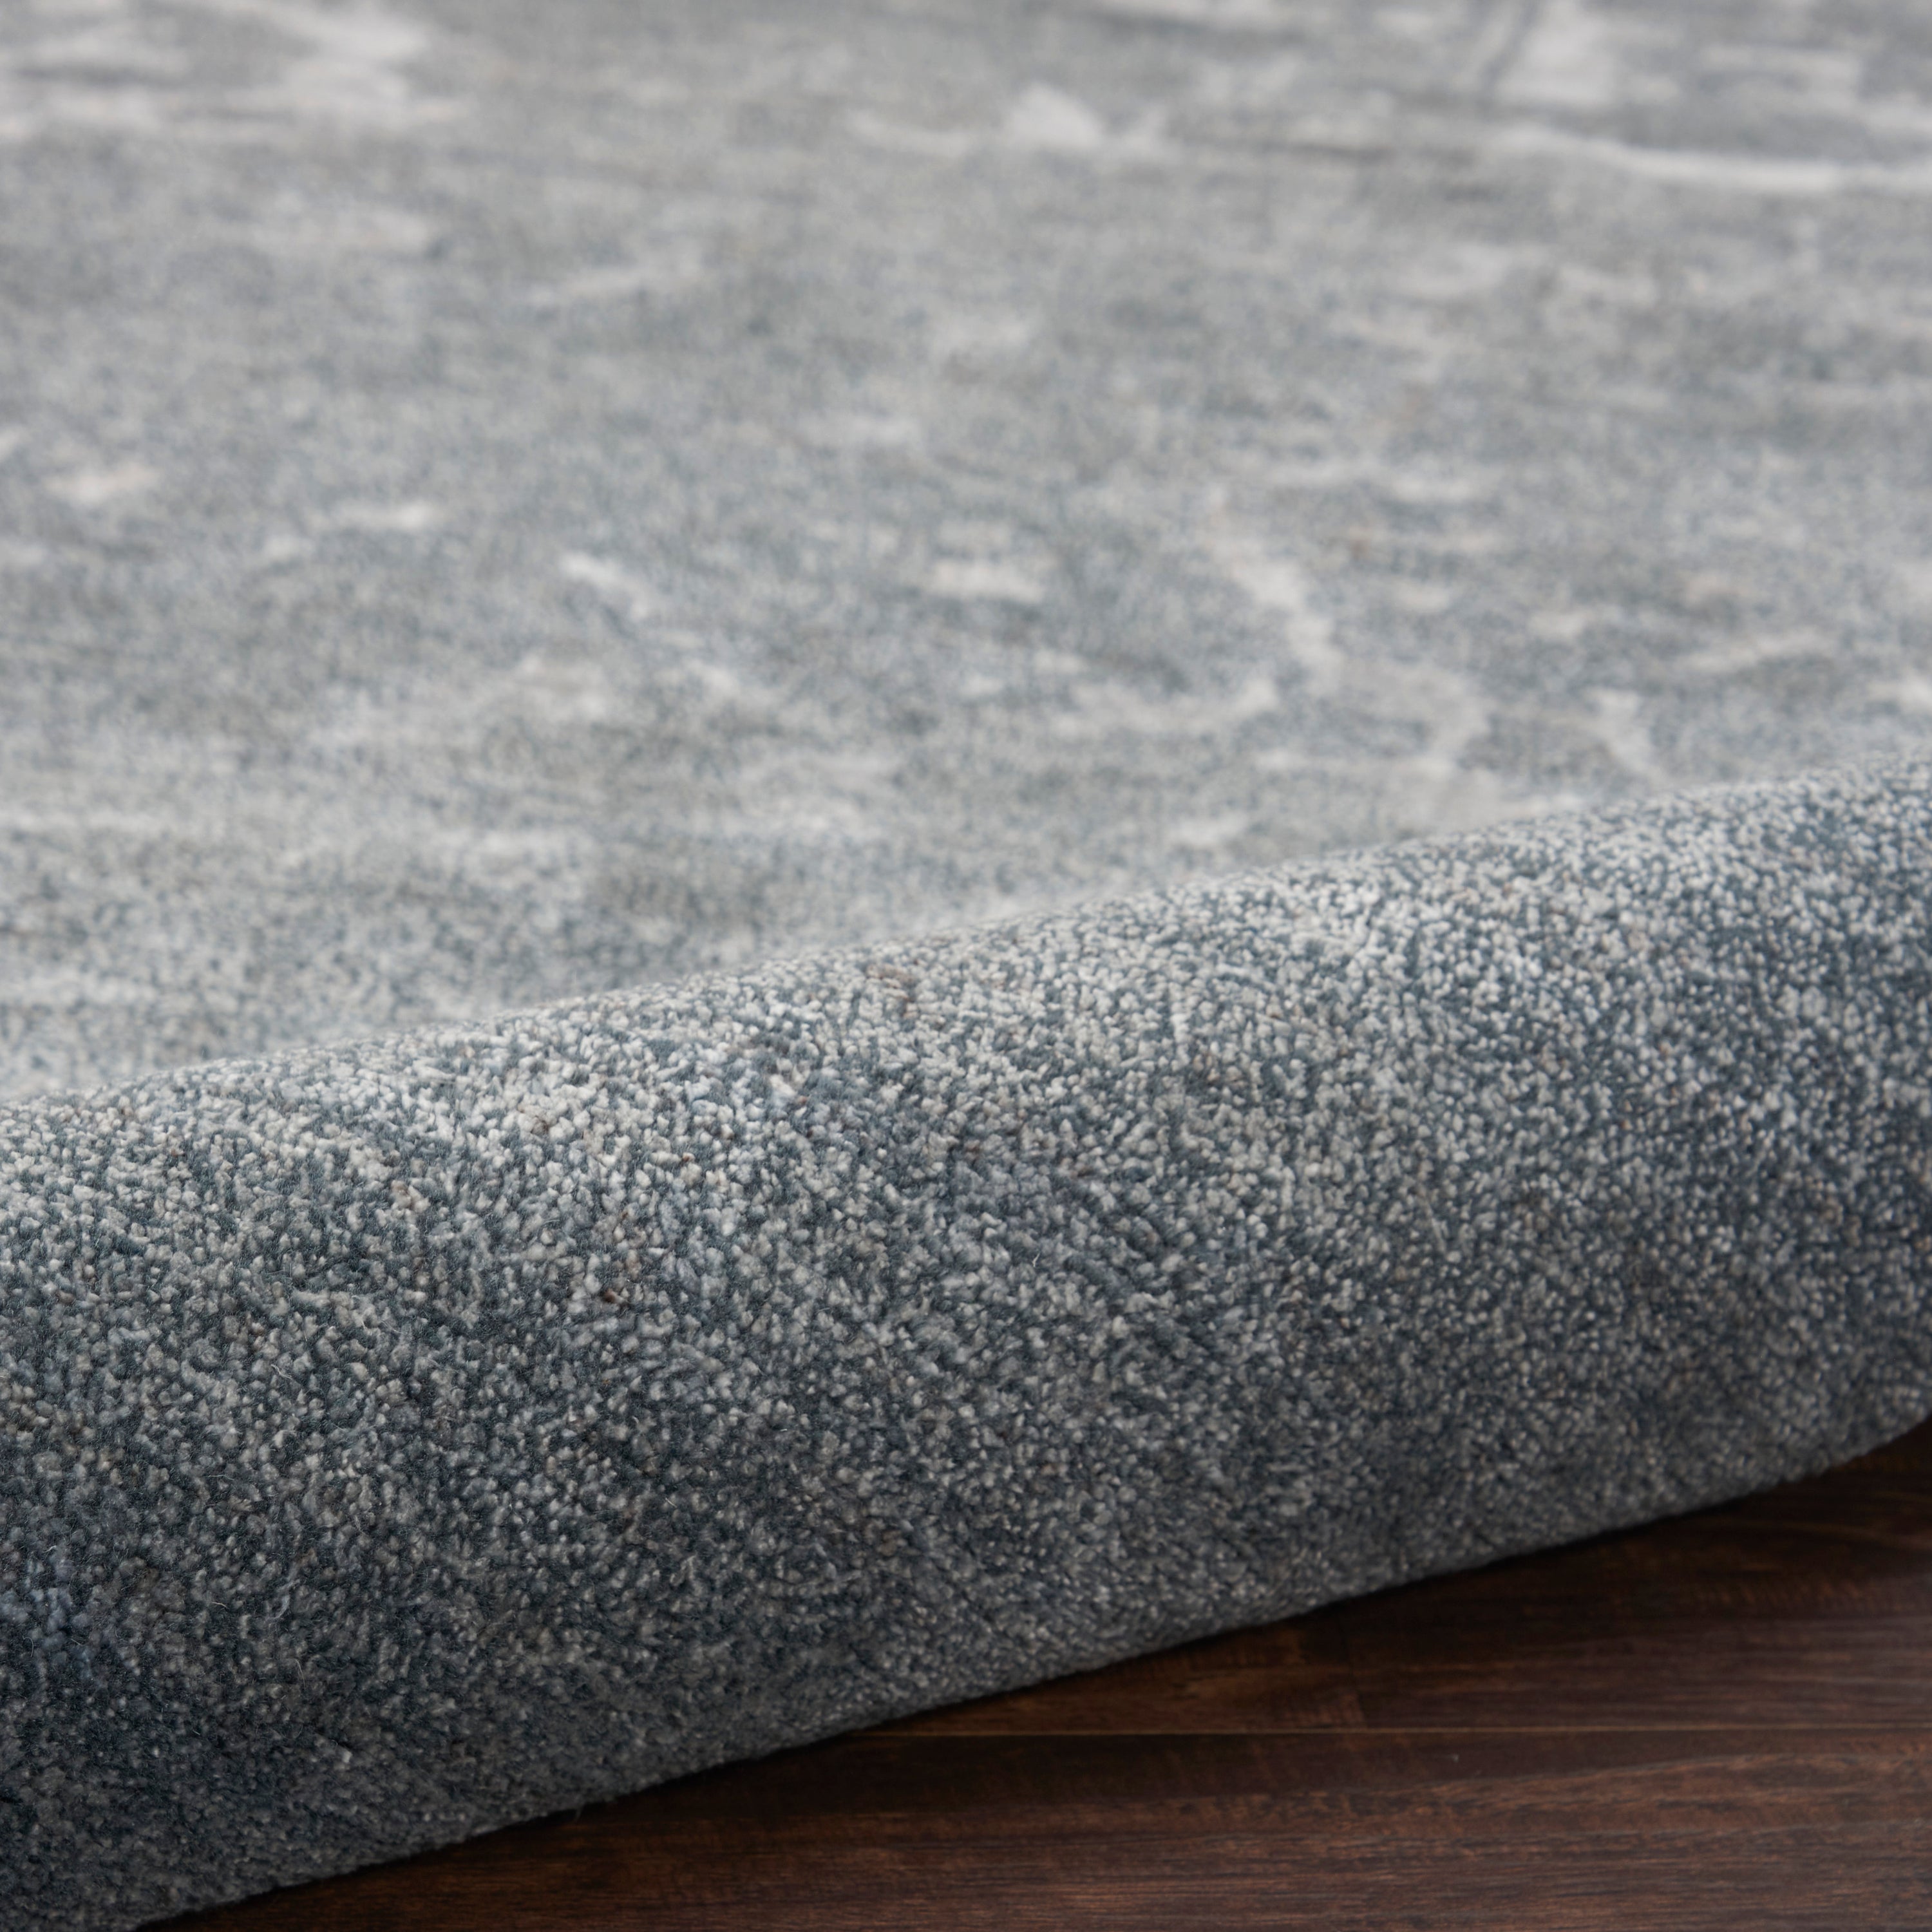 Close-up of a new, plush gray carpet on a wooden floor.